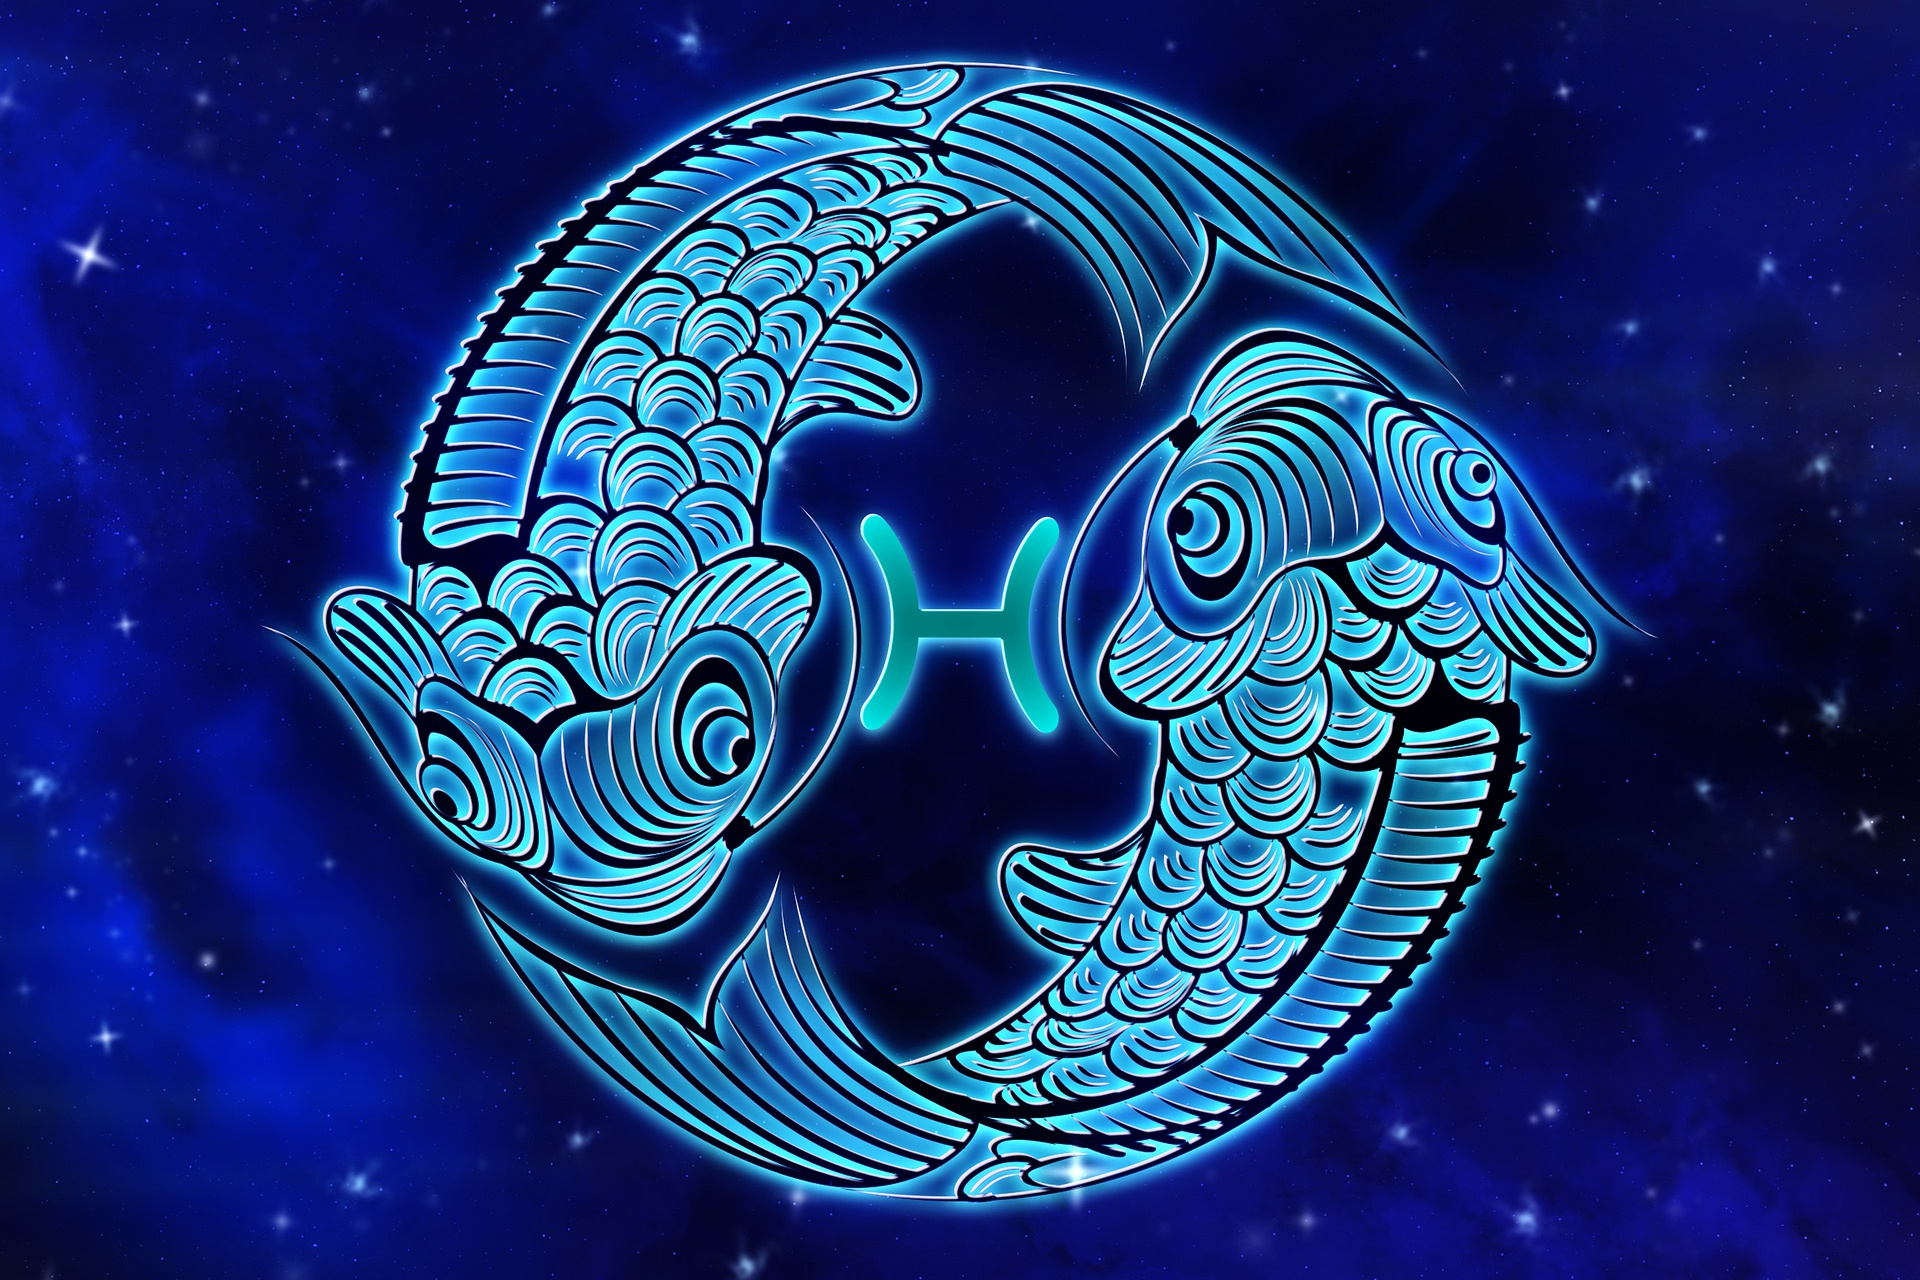 Pisces (February 19 to March 20)